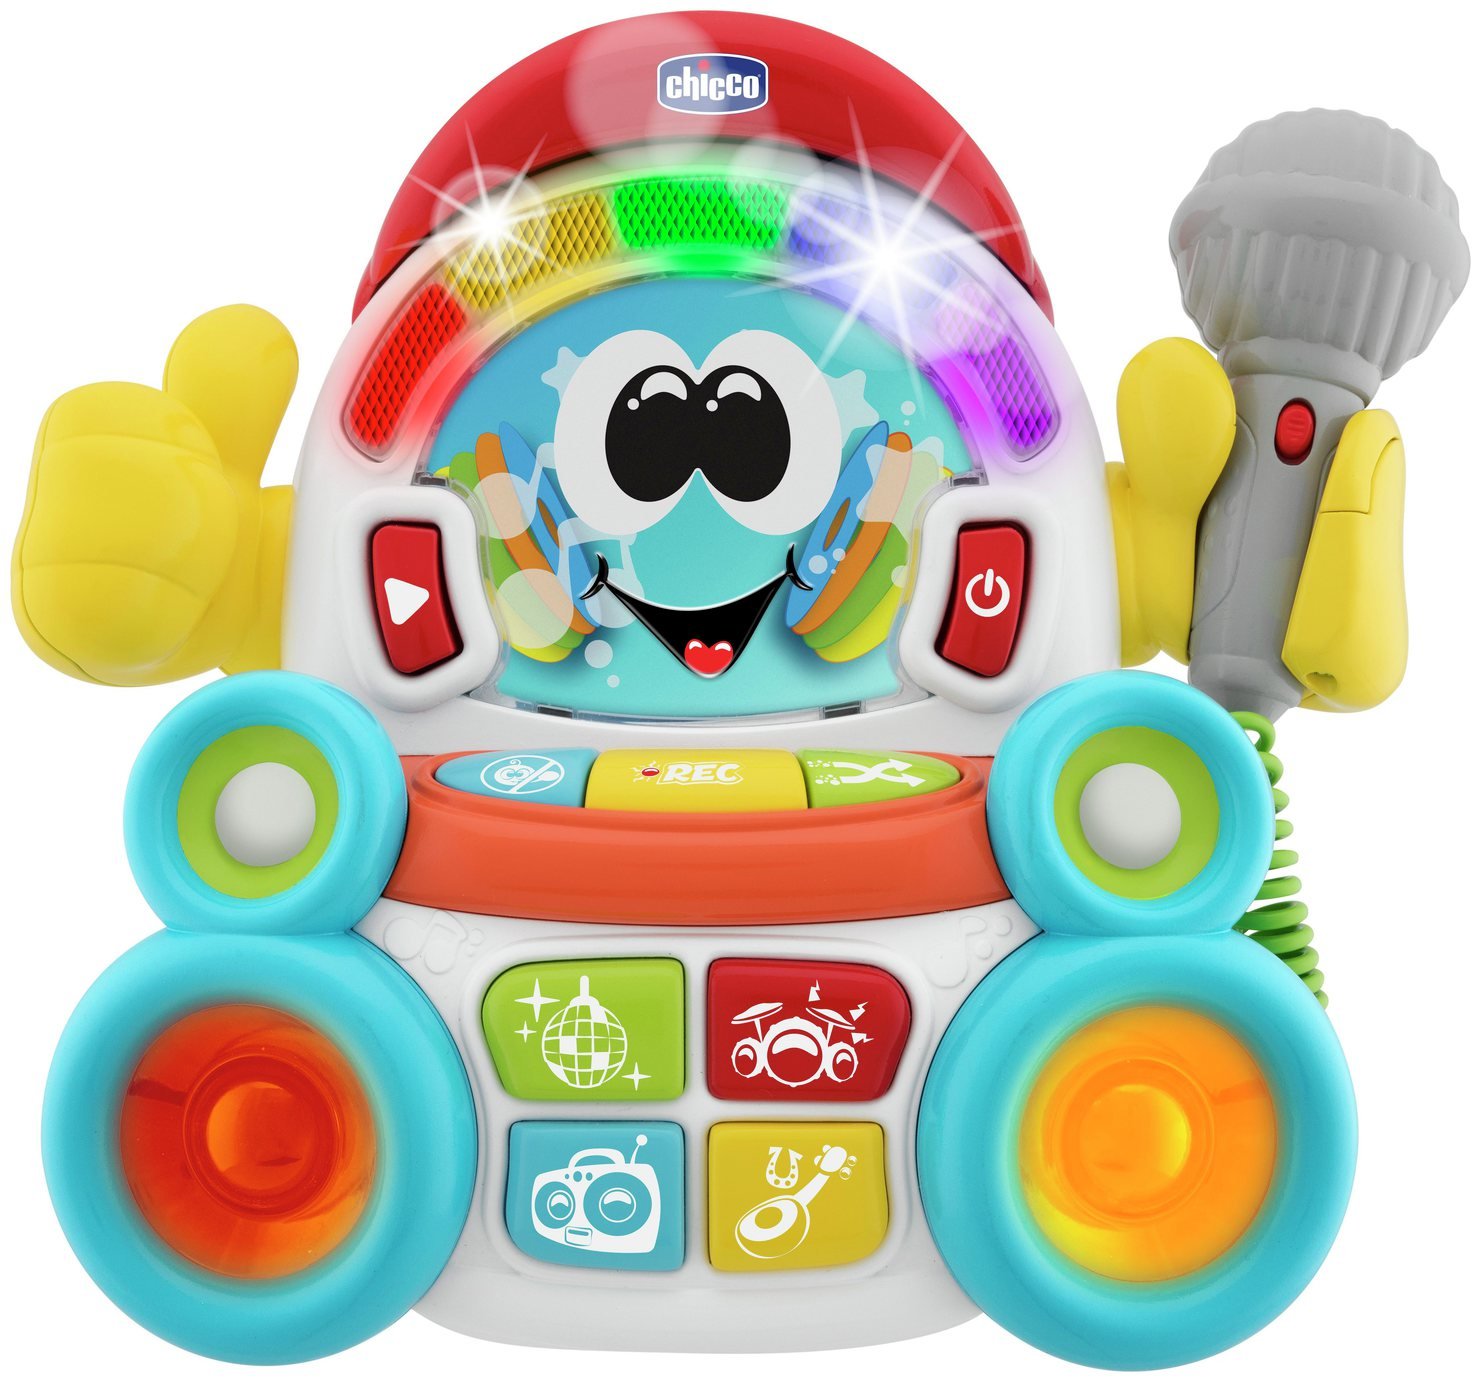 Chicco Songy the Singer review